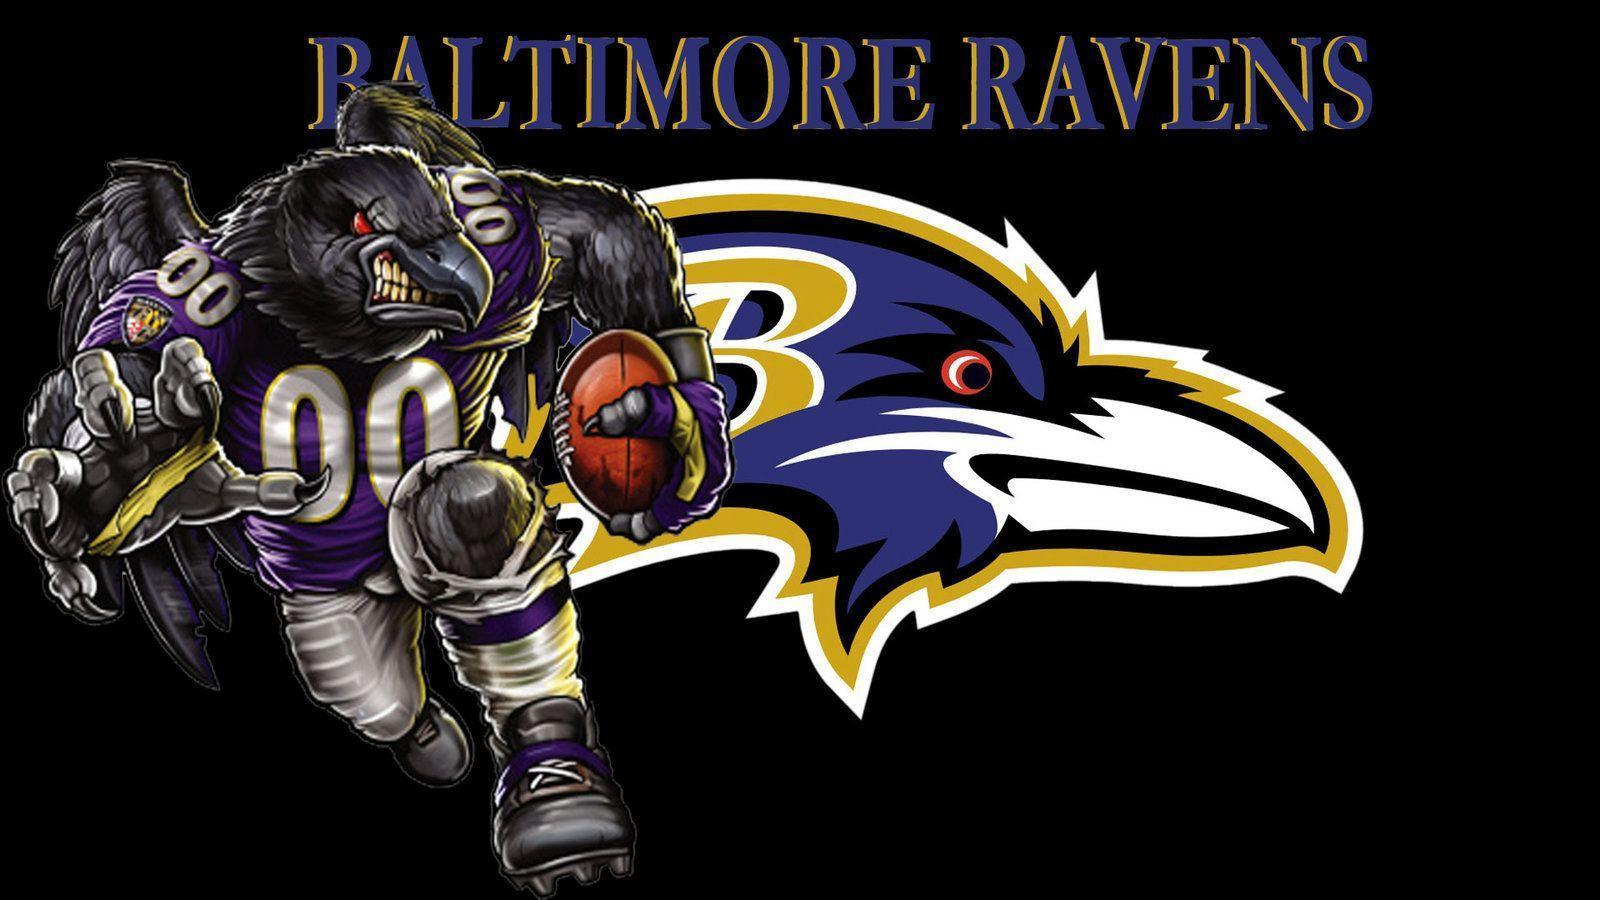 Adorable 49 Baltimore Ravens Image HDQ Cover